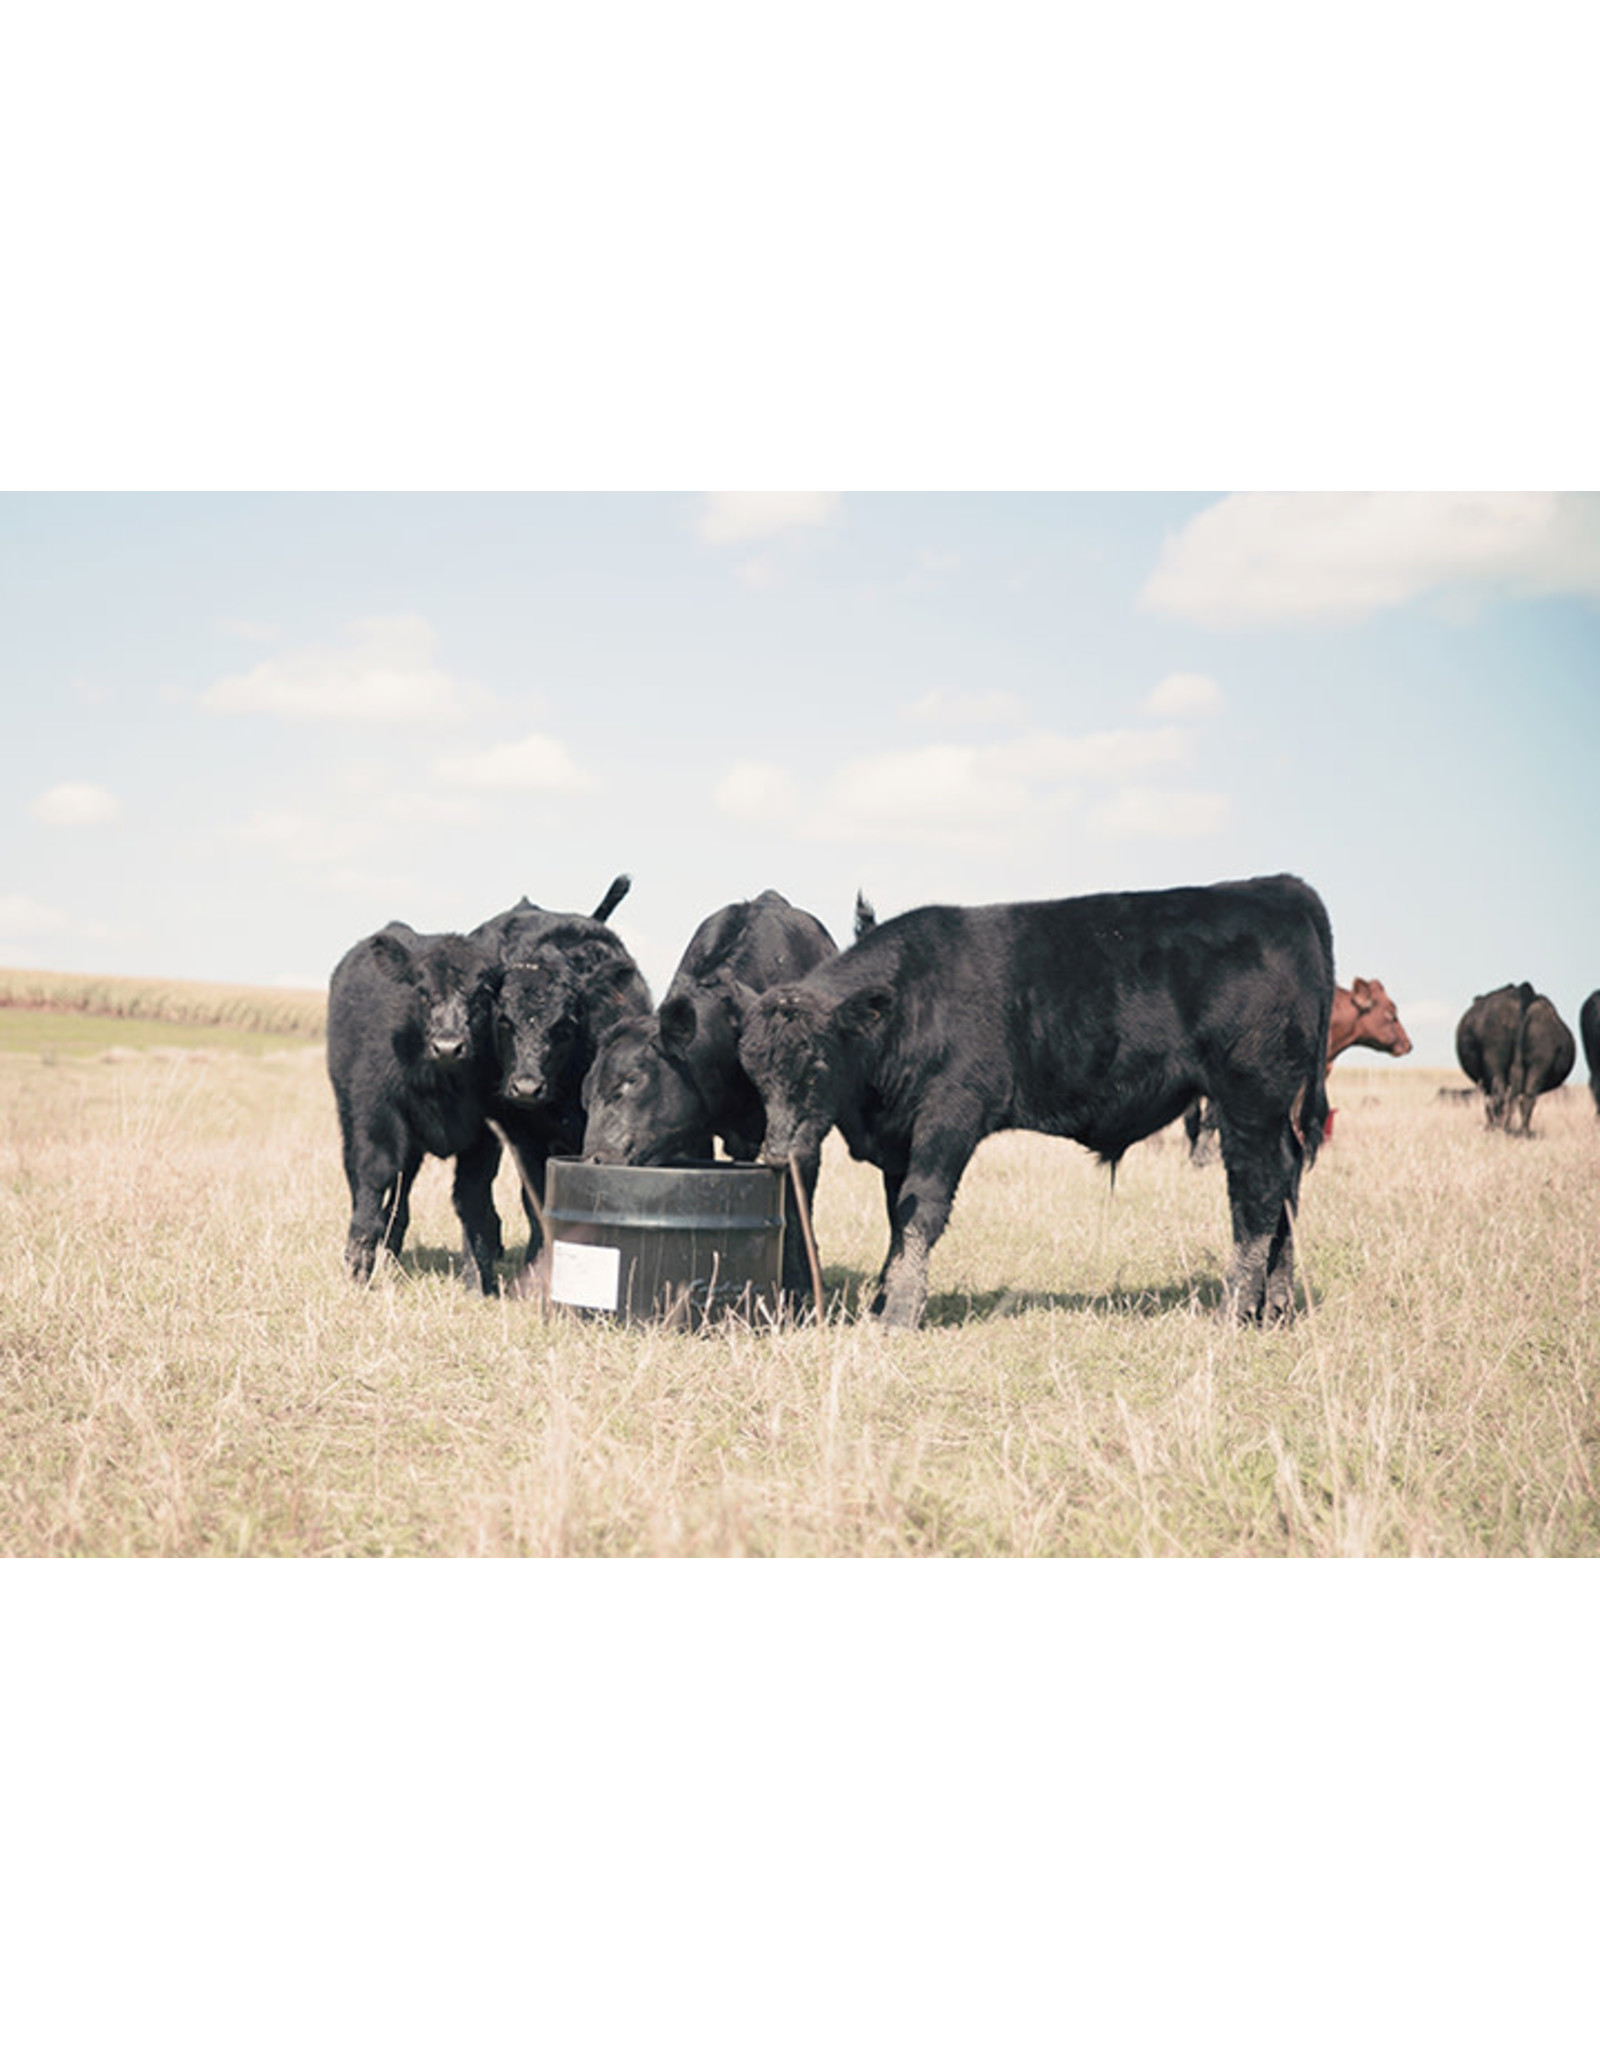 Crystalyx BRIGADE Steel 250lbs - Ideally fortified and suited for weaning calves and cattle 45 days prior to breeding. Statistically shown to add .38 lbs average daily gain, decrease calf mortality by half, and decrease incidences calf illness by almost HALF.